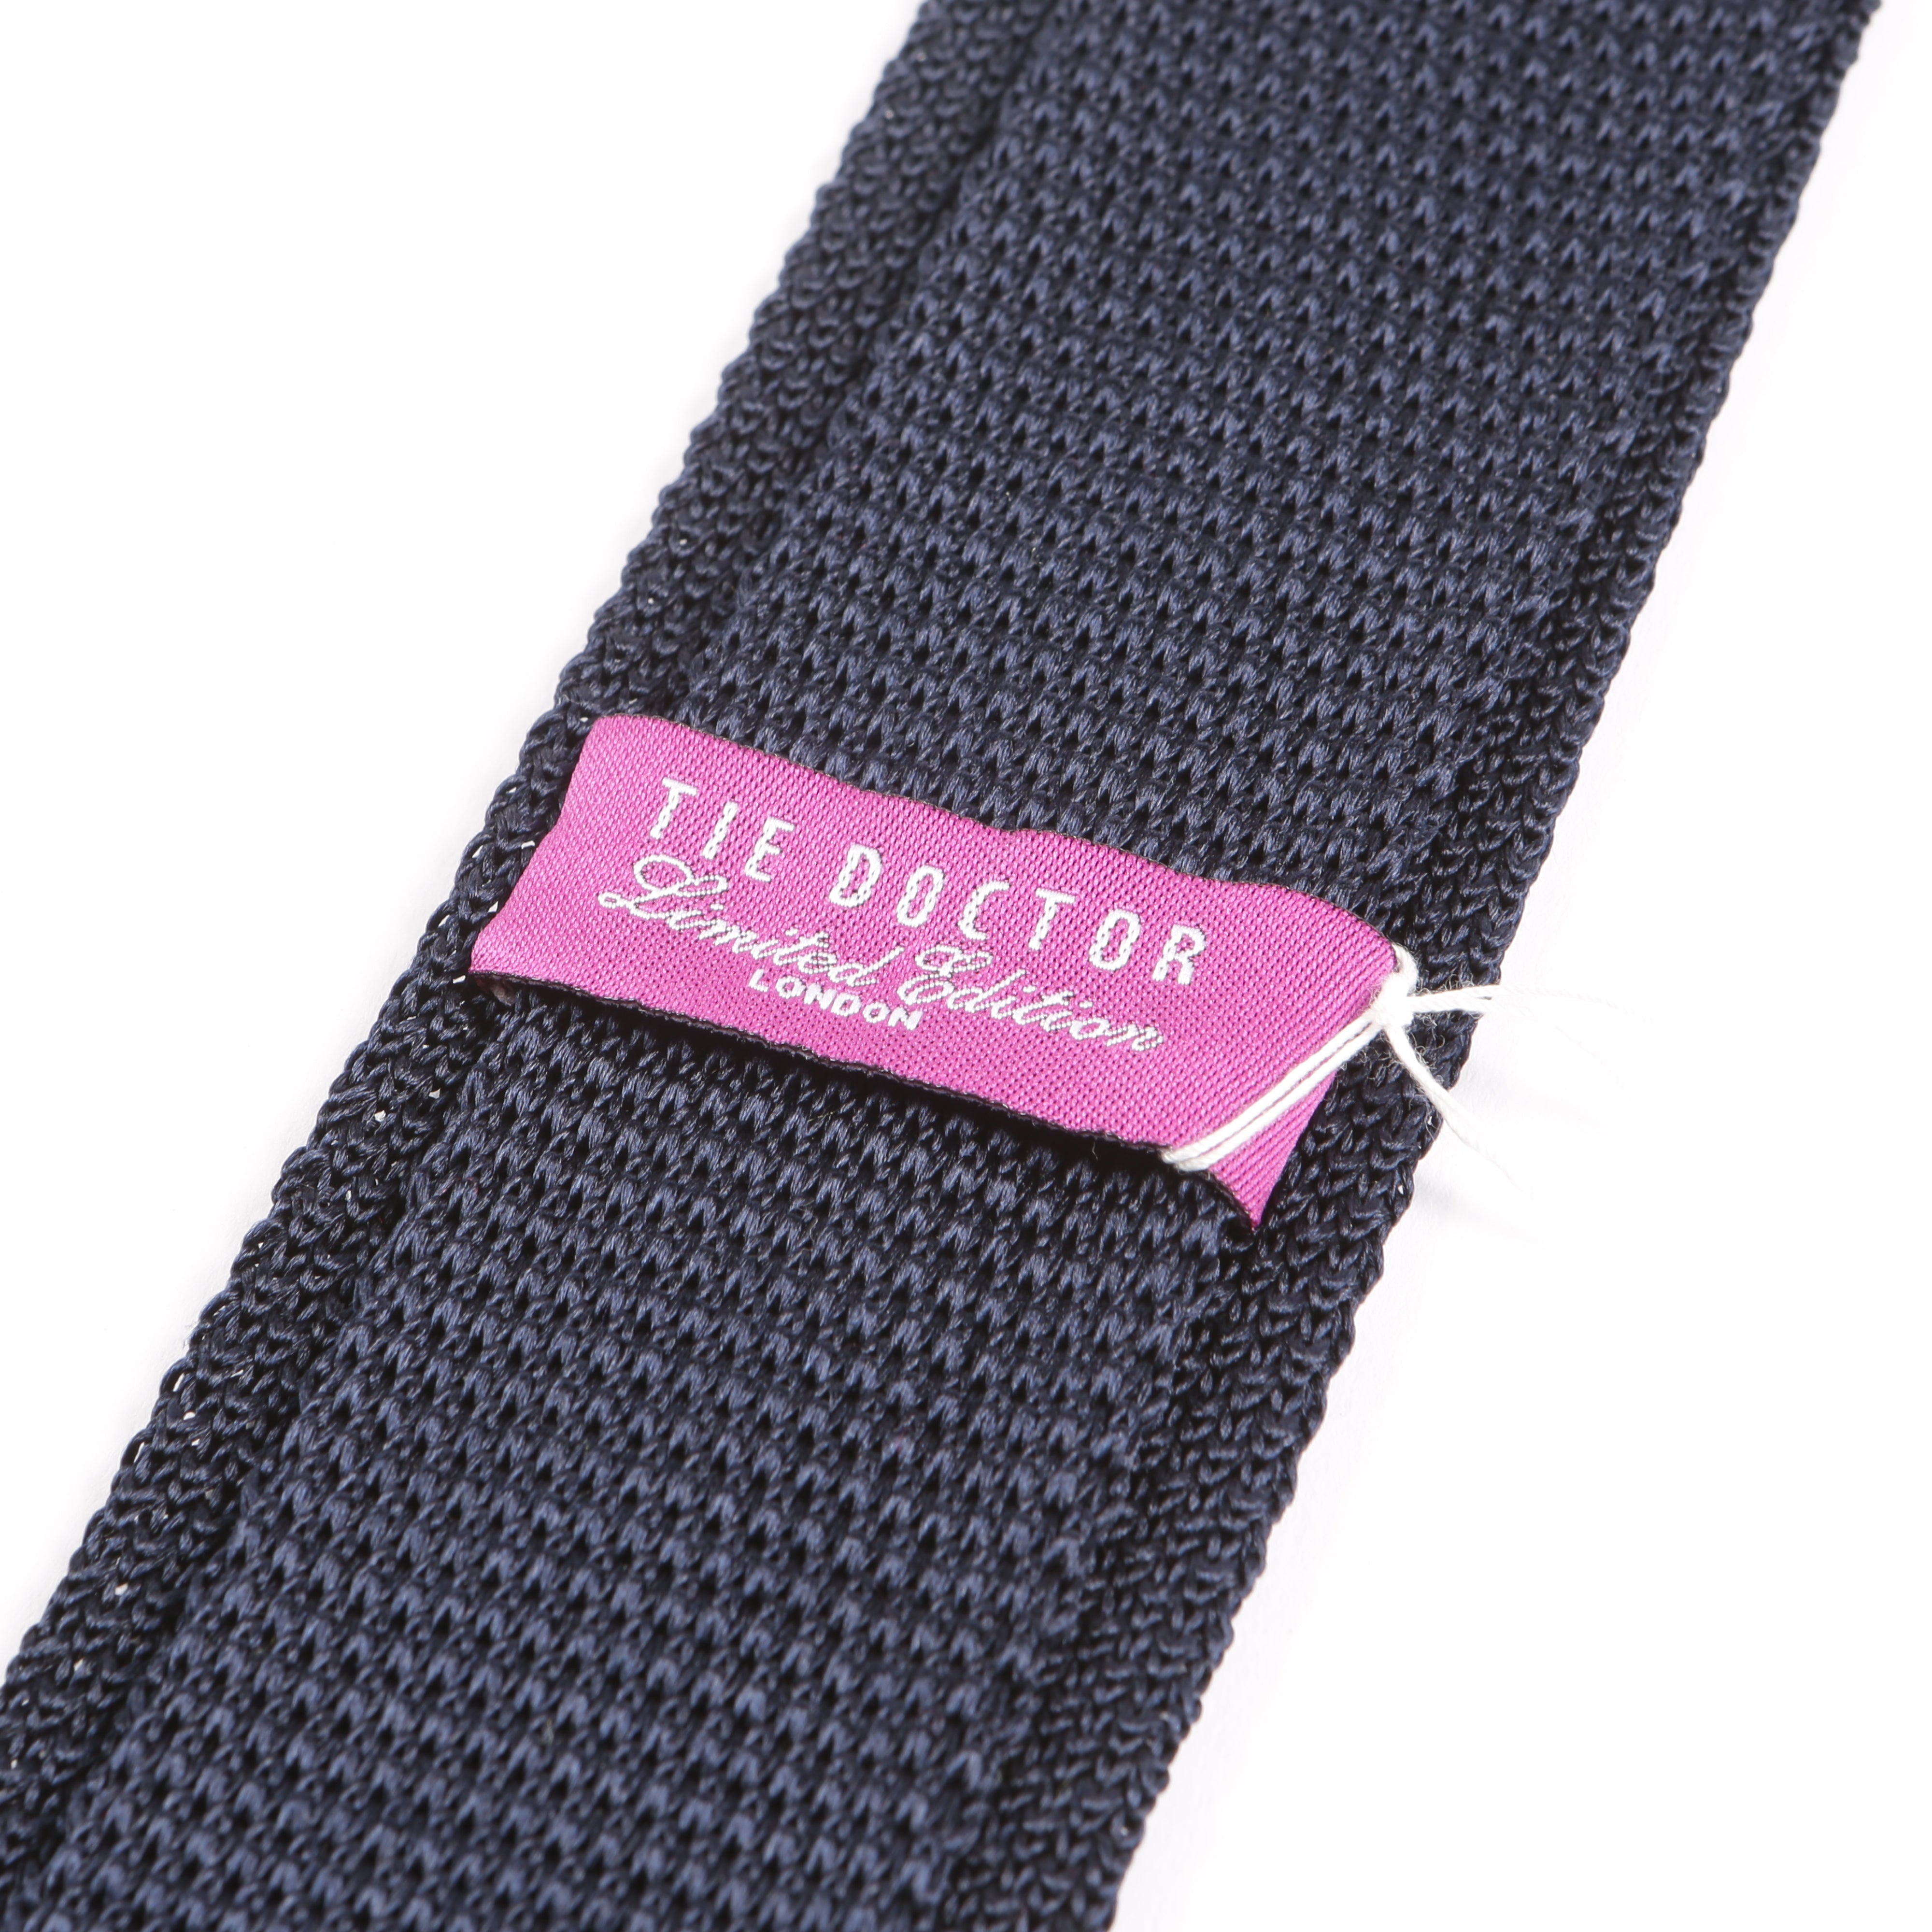 Navy And Pink Polka Dot Pointed Silk Knitted Tie - Tie Doctor  